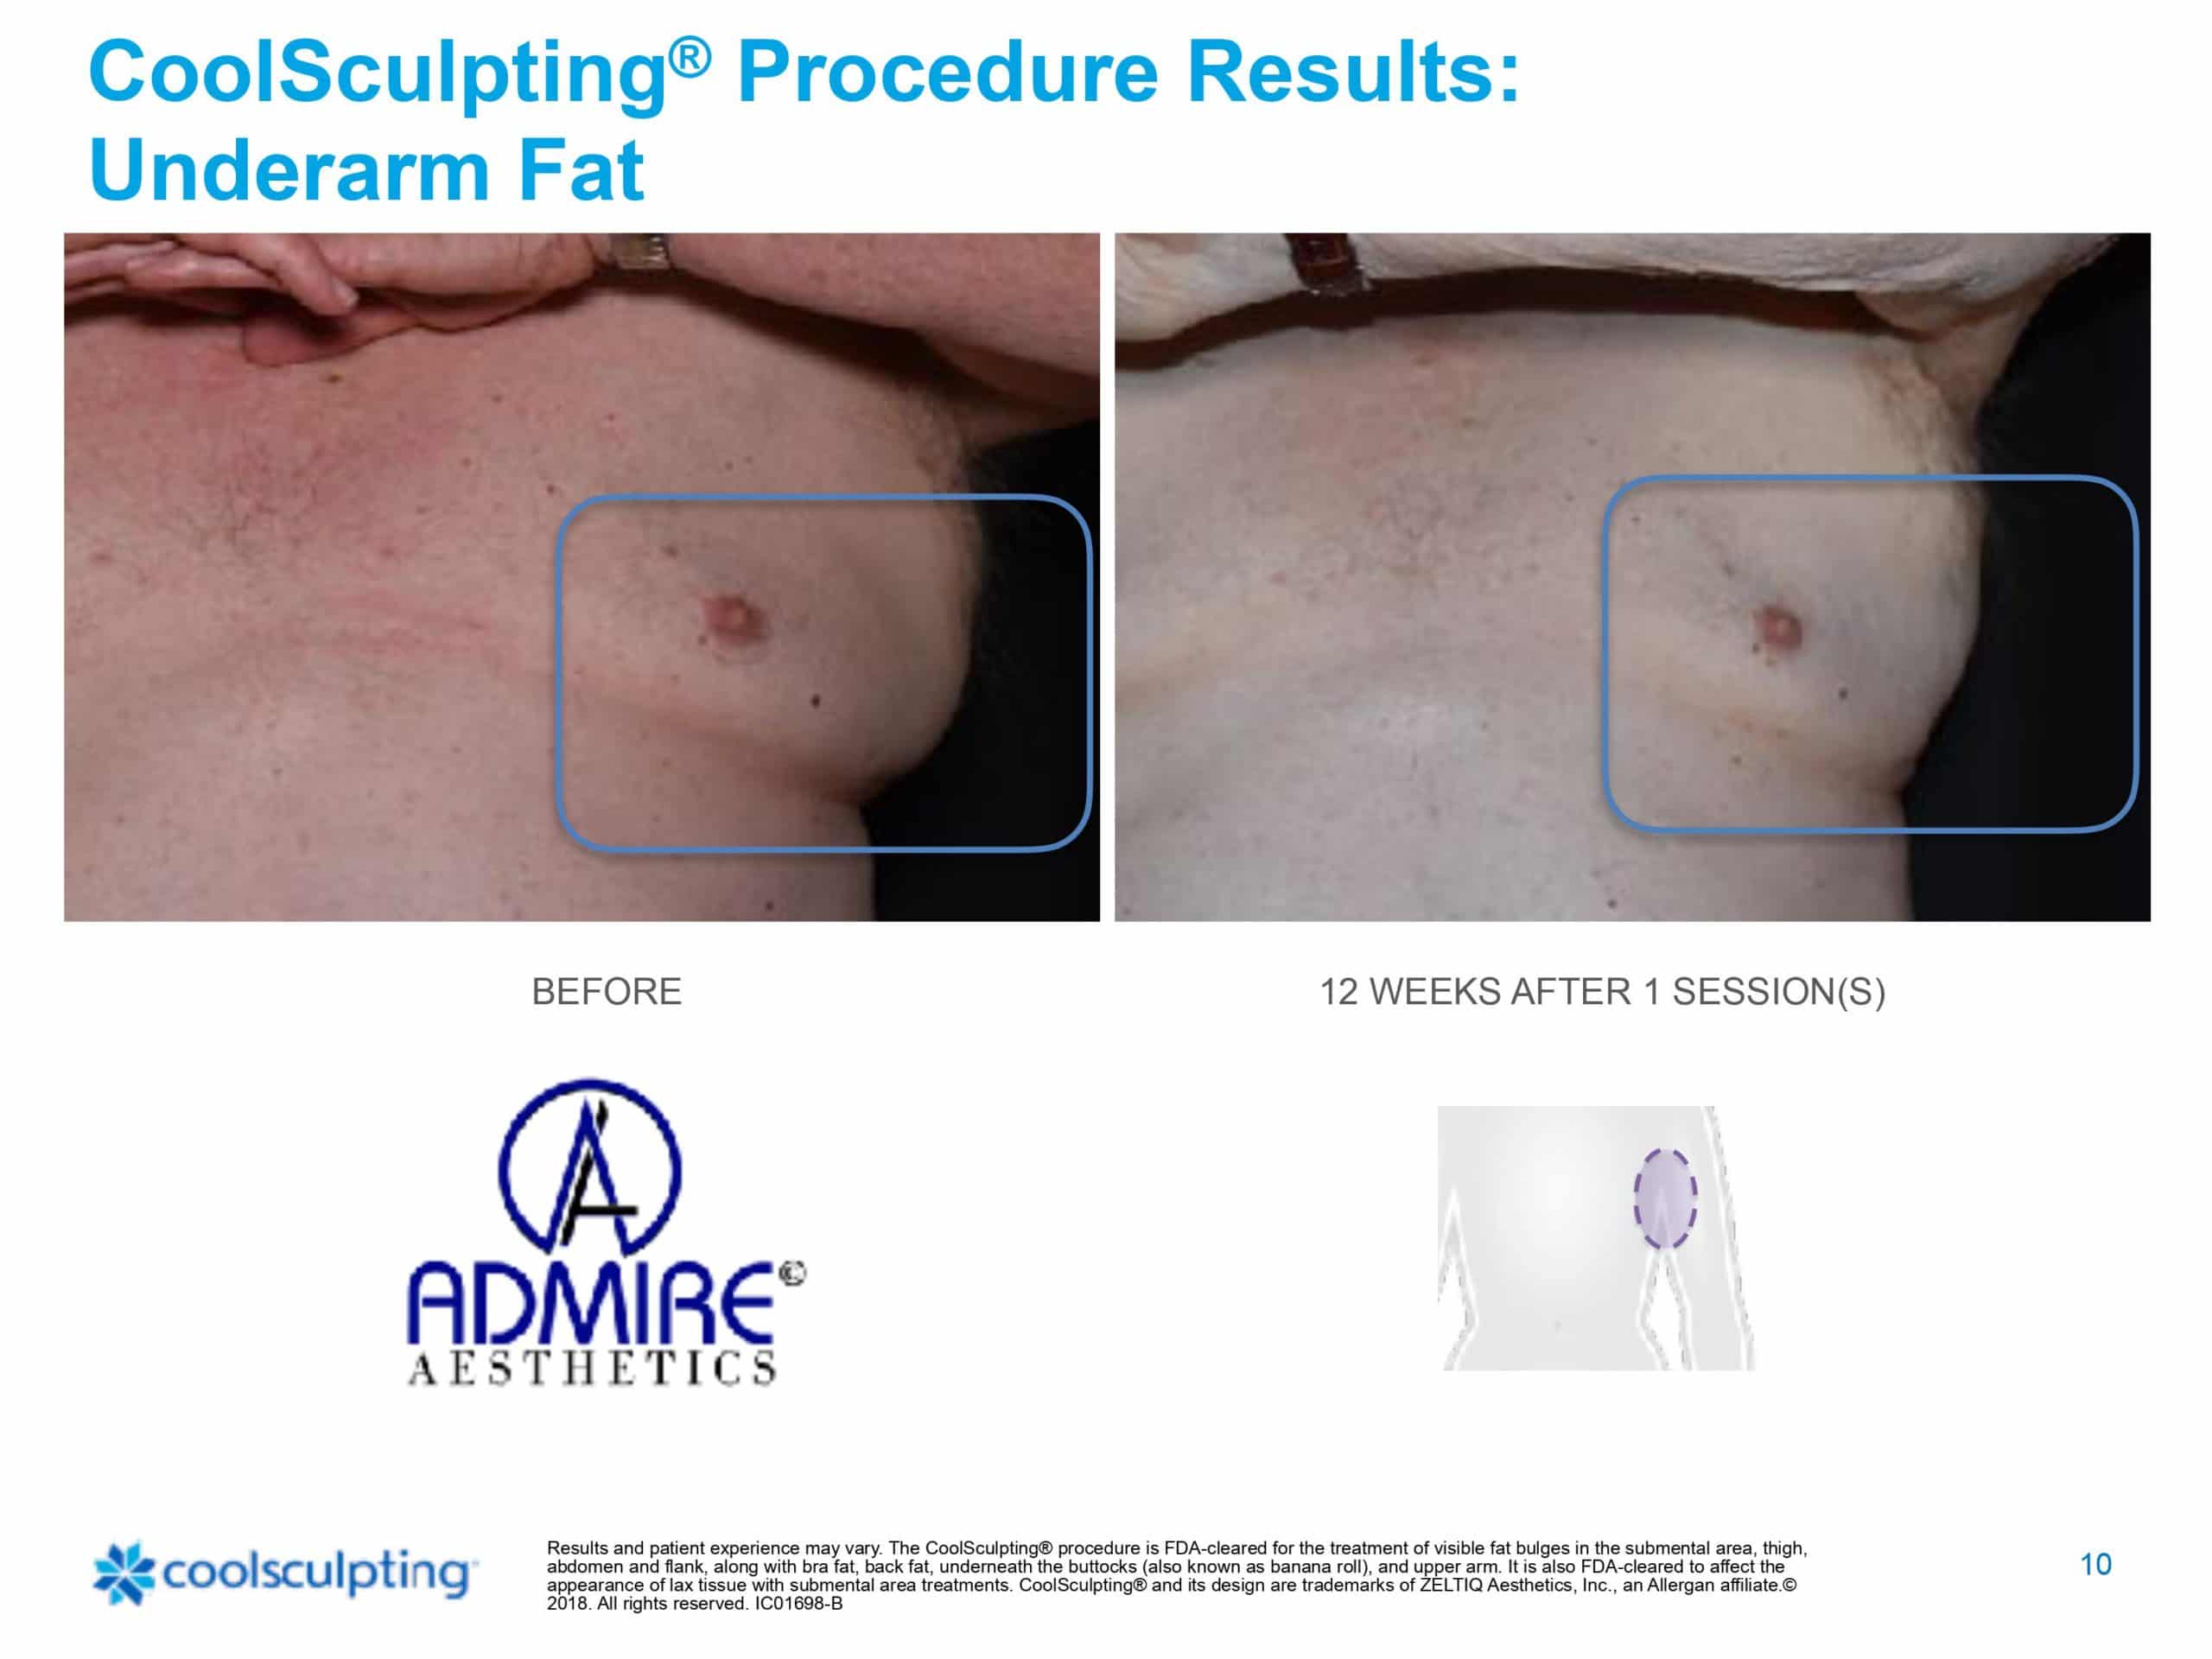 Mans chest before and after coolsculpting elite treatment at admire aesthetics in Medford, OR.